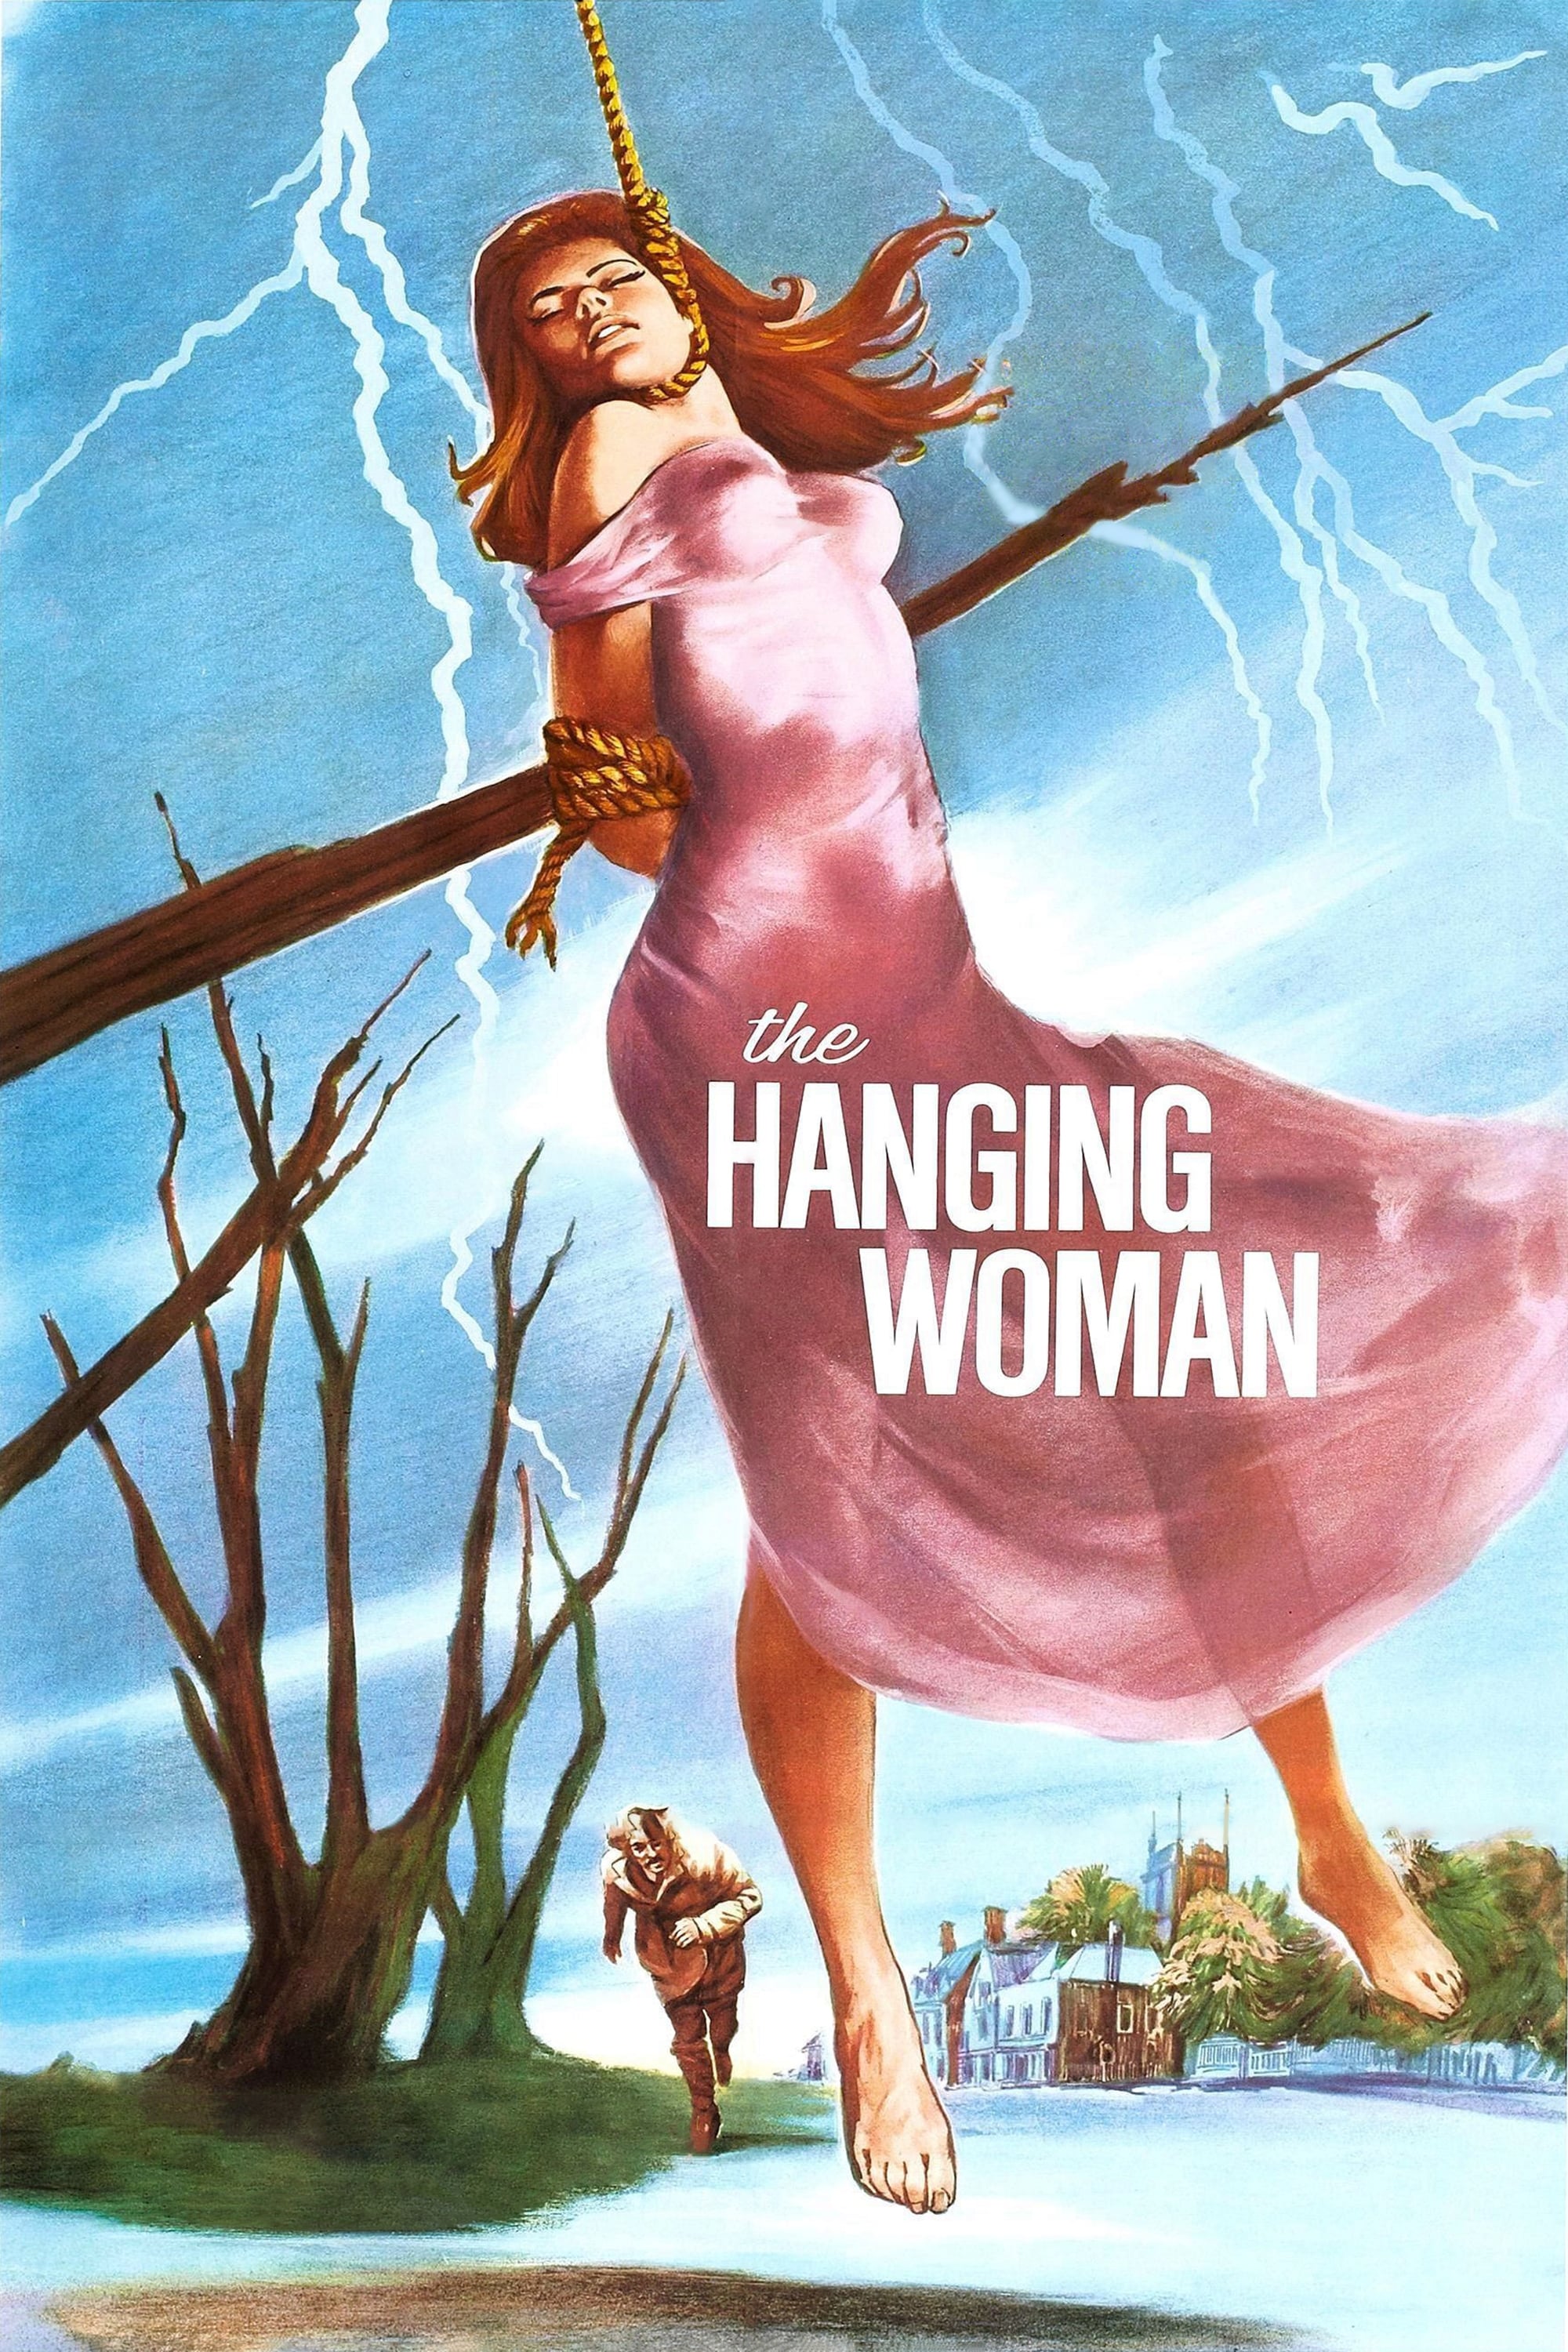 The Hanging Woman (1973)